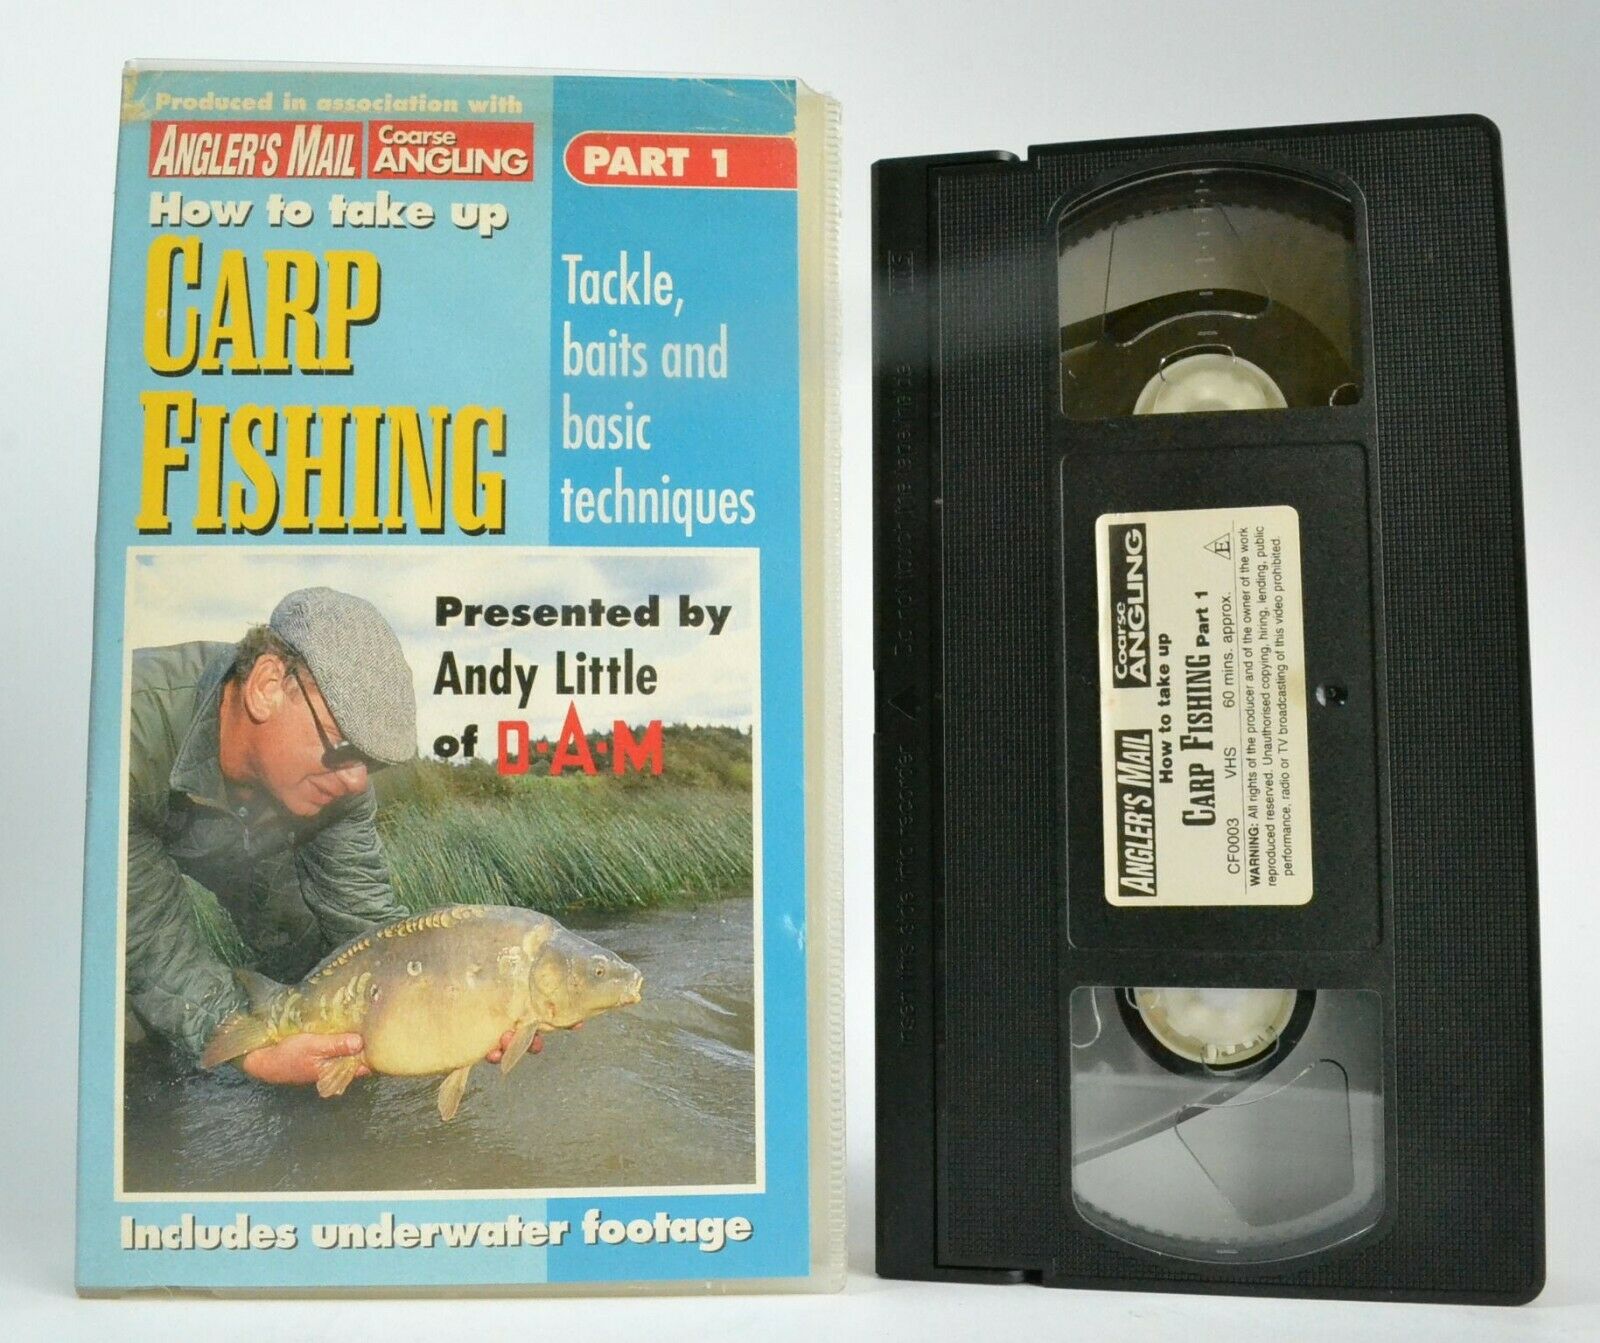 How To Take Up Carp Fishing (Part 1): Old Bury Hill Lake [Angler's Mail] - VHS-